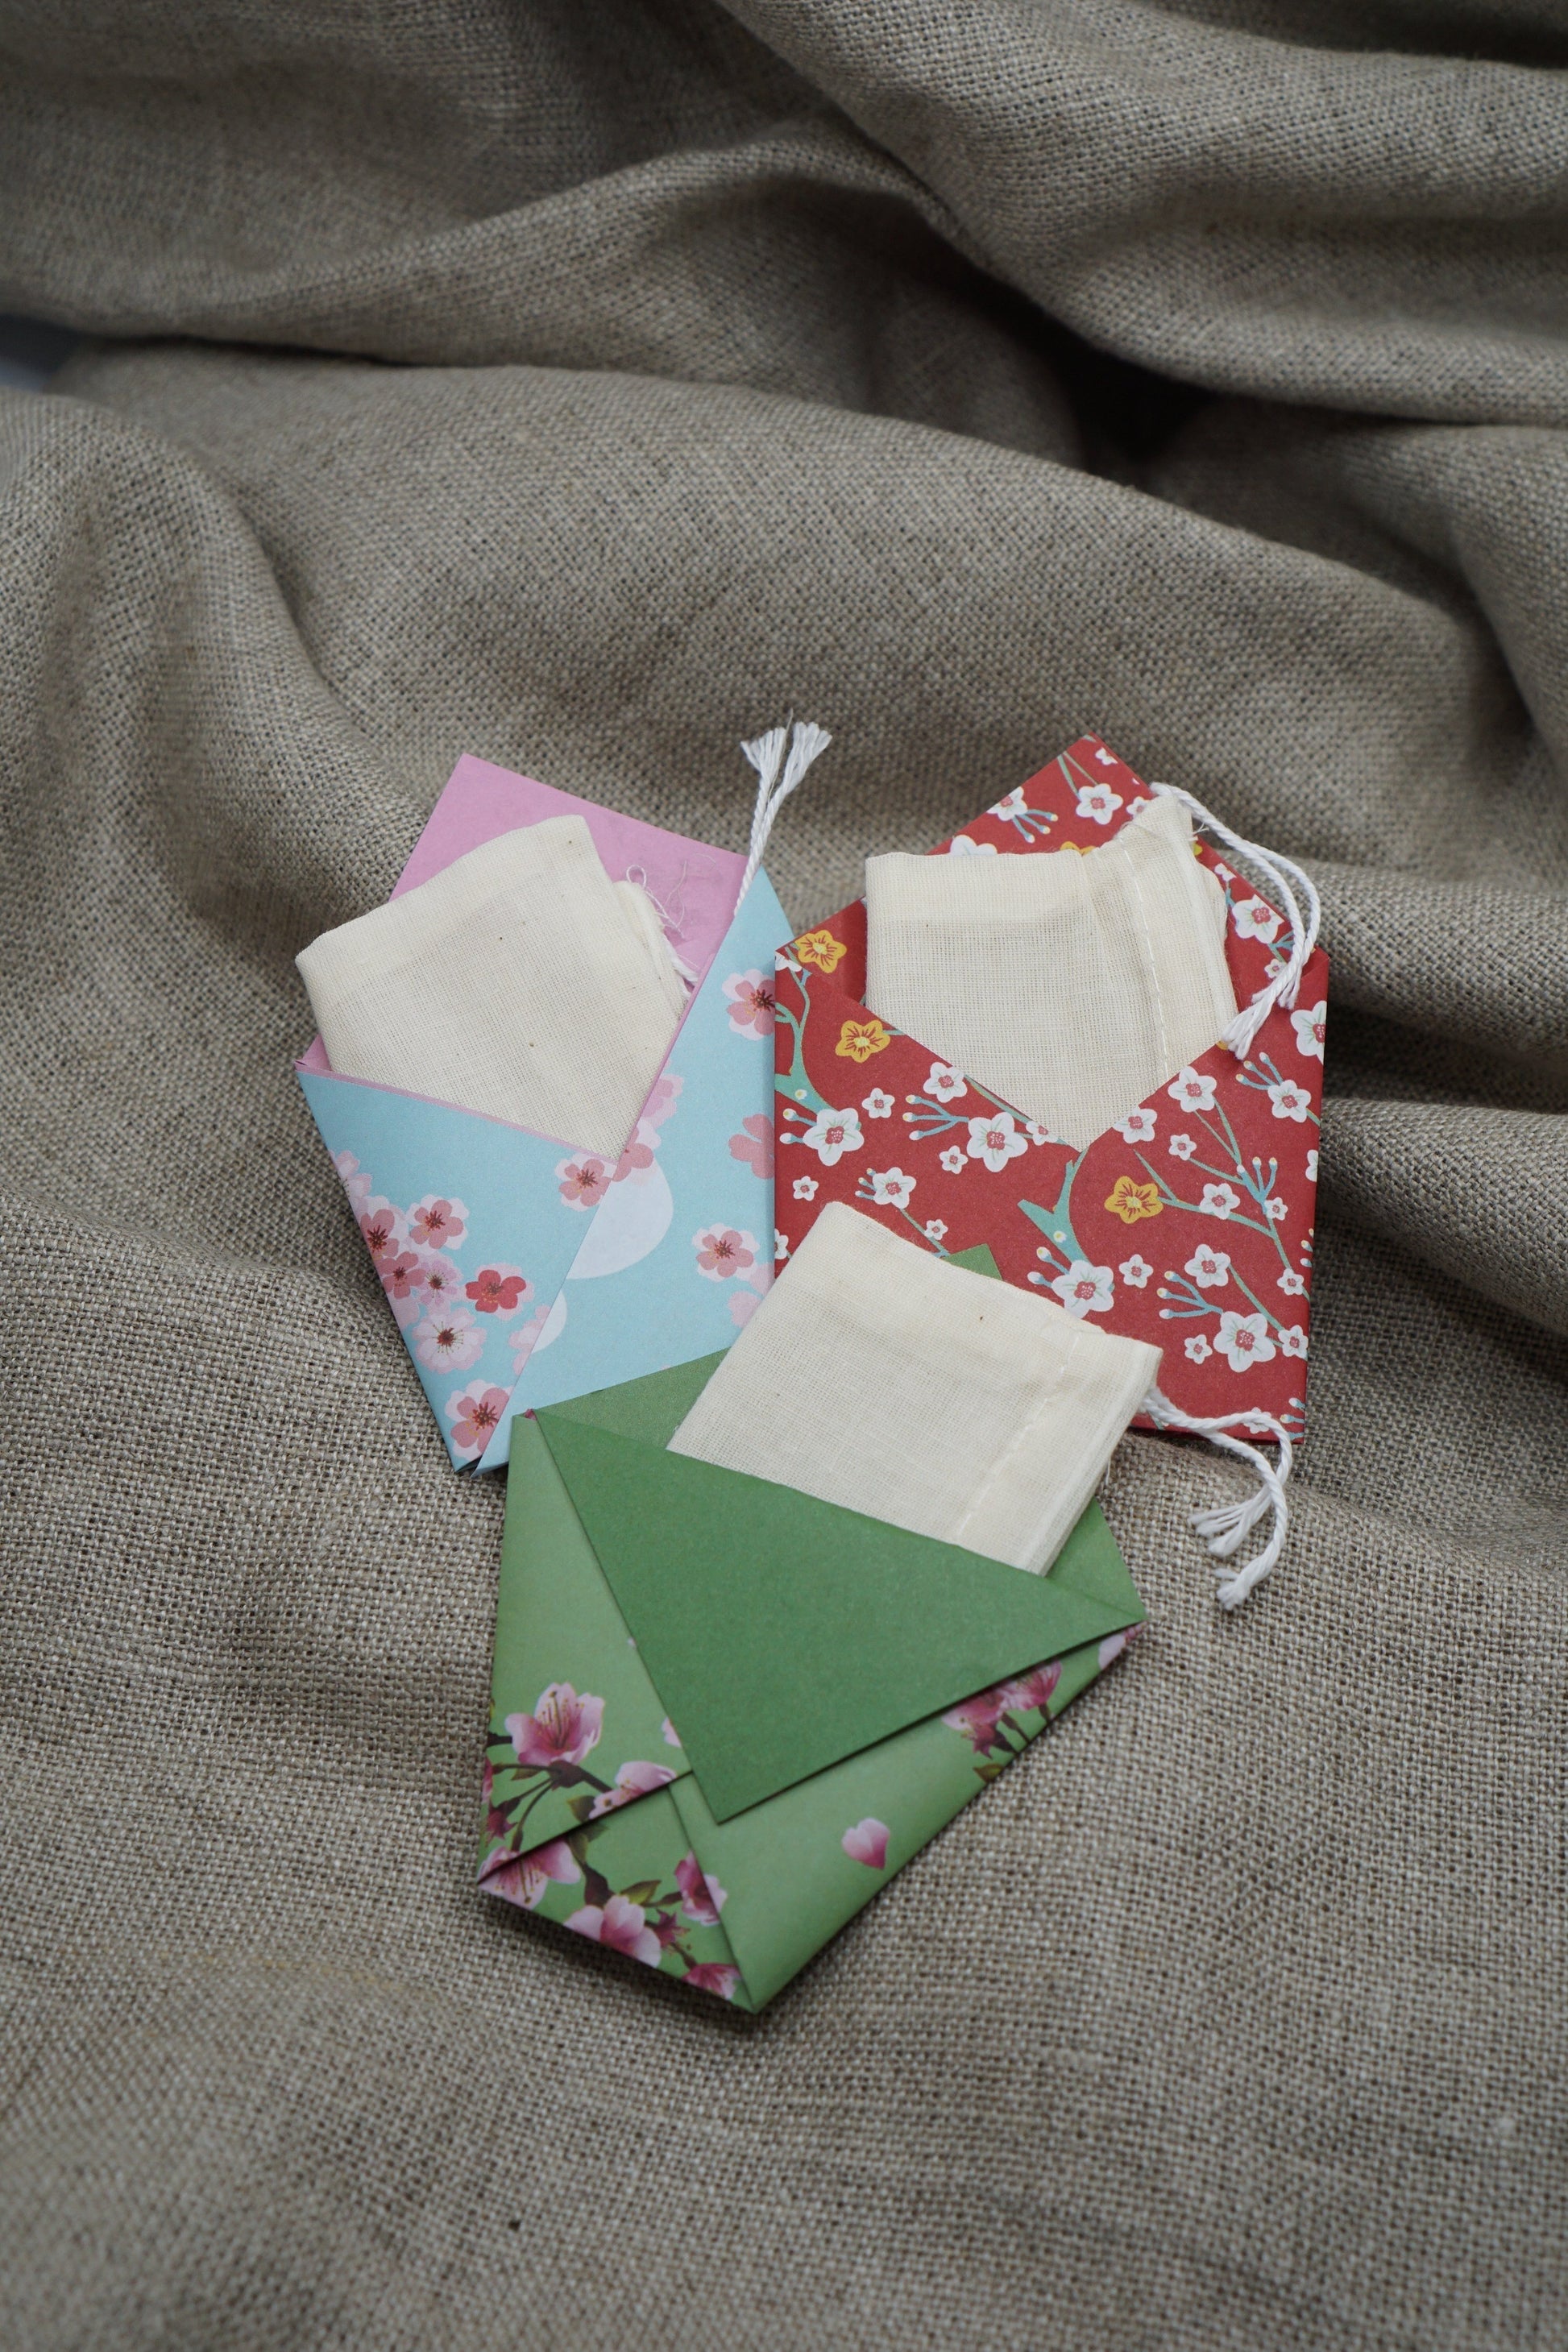 Organic Cotton Teabag in Origami Sleeve